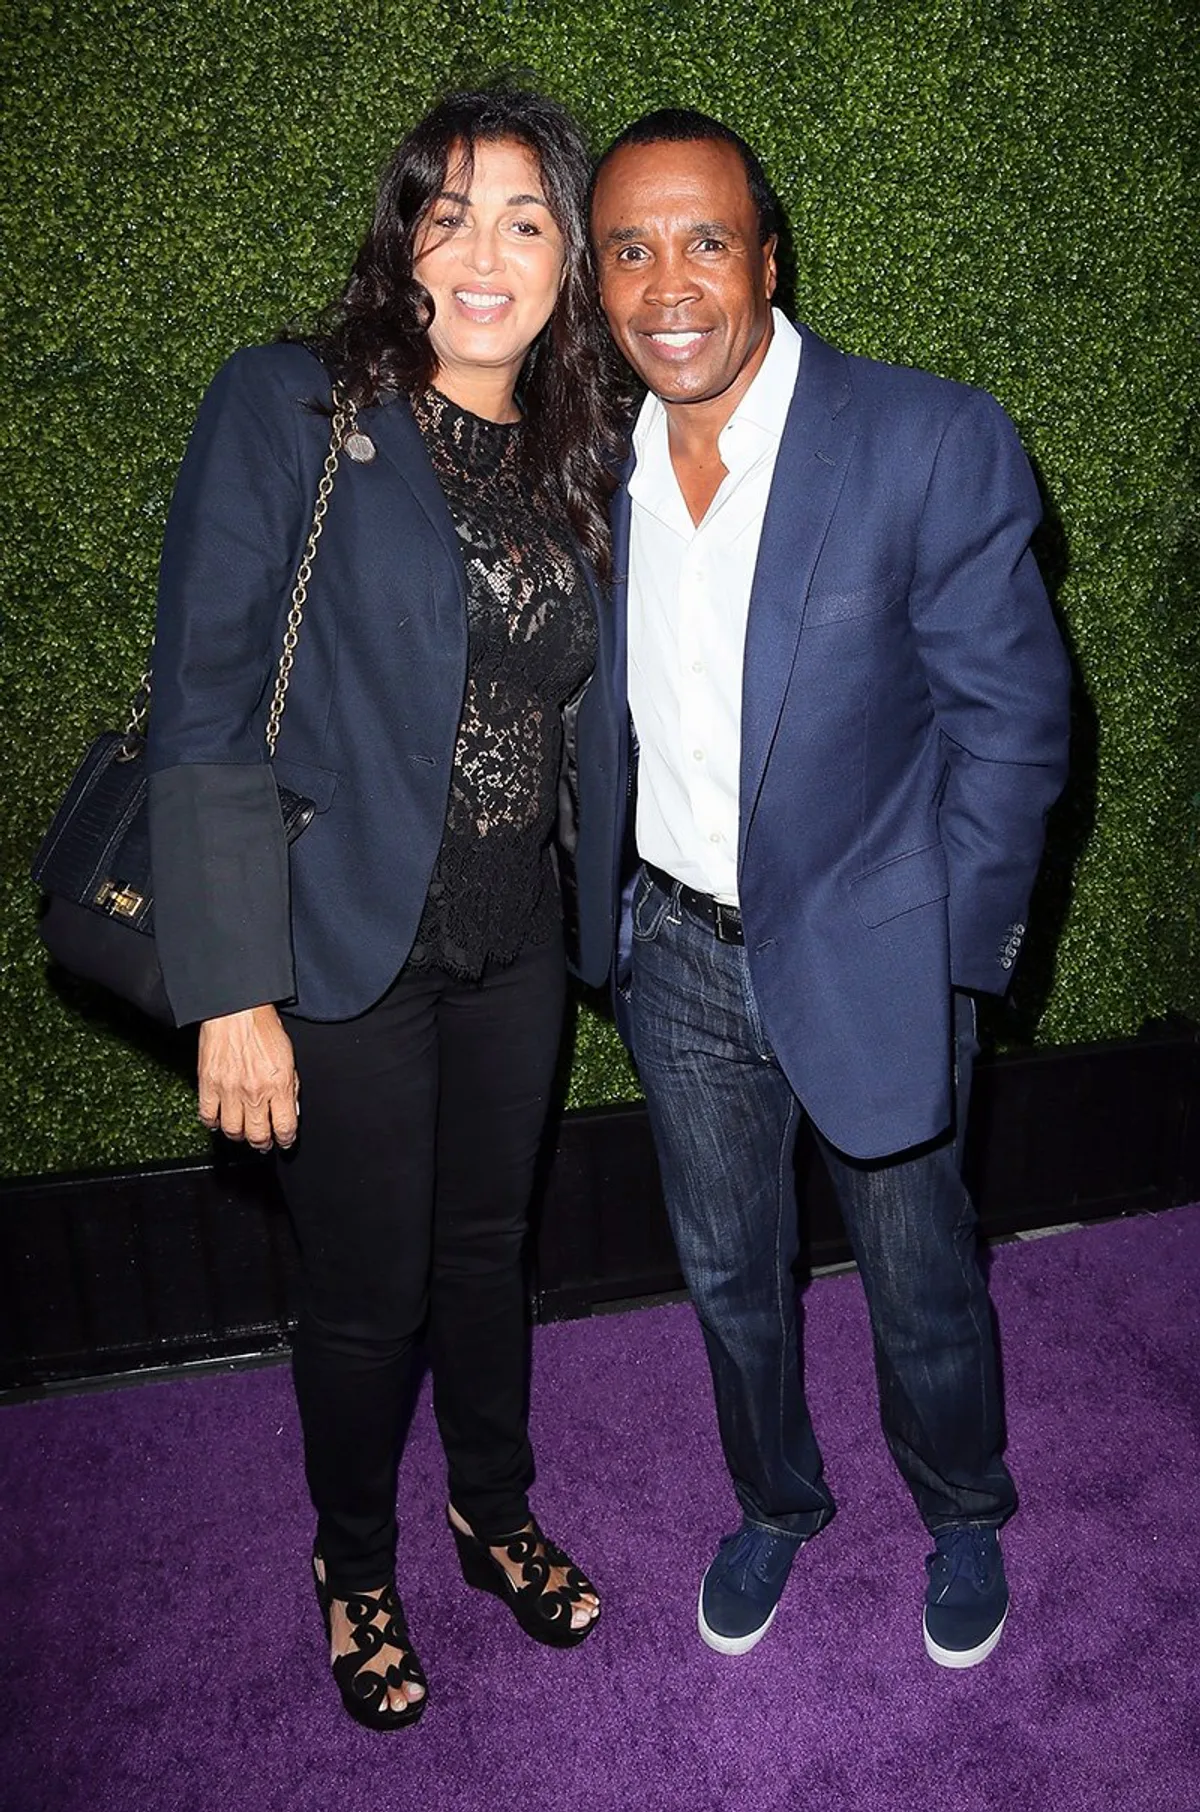 Sugar Ray Leonard and Bernadette Robi attend the HollyRod Foundation's 16th Annual DesignCare in Los Angeles, California in July 2014. | Photo: Getty Images